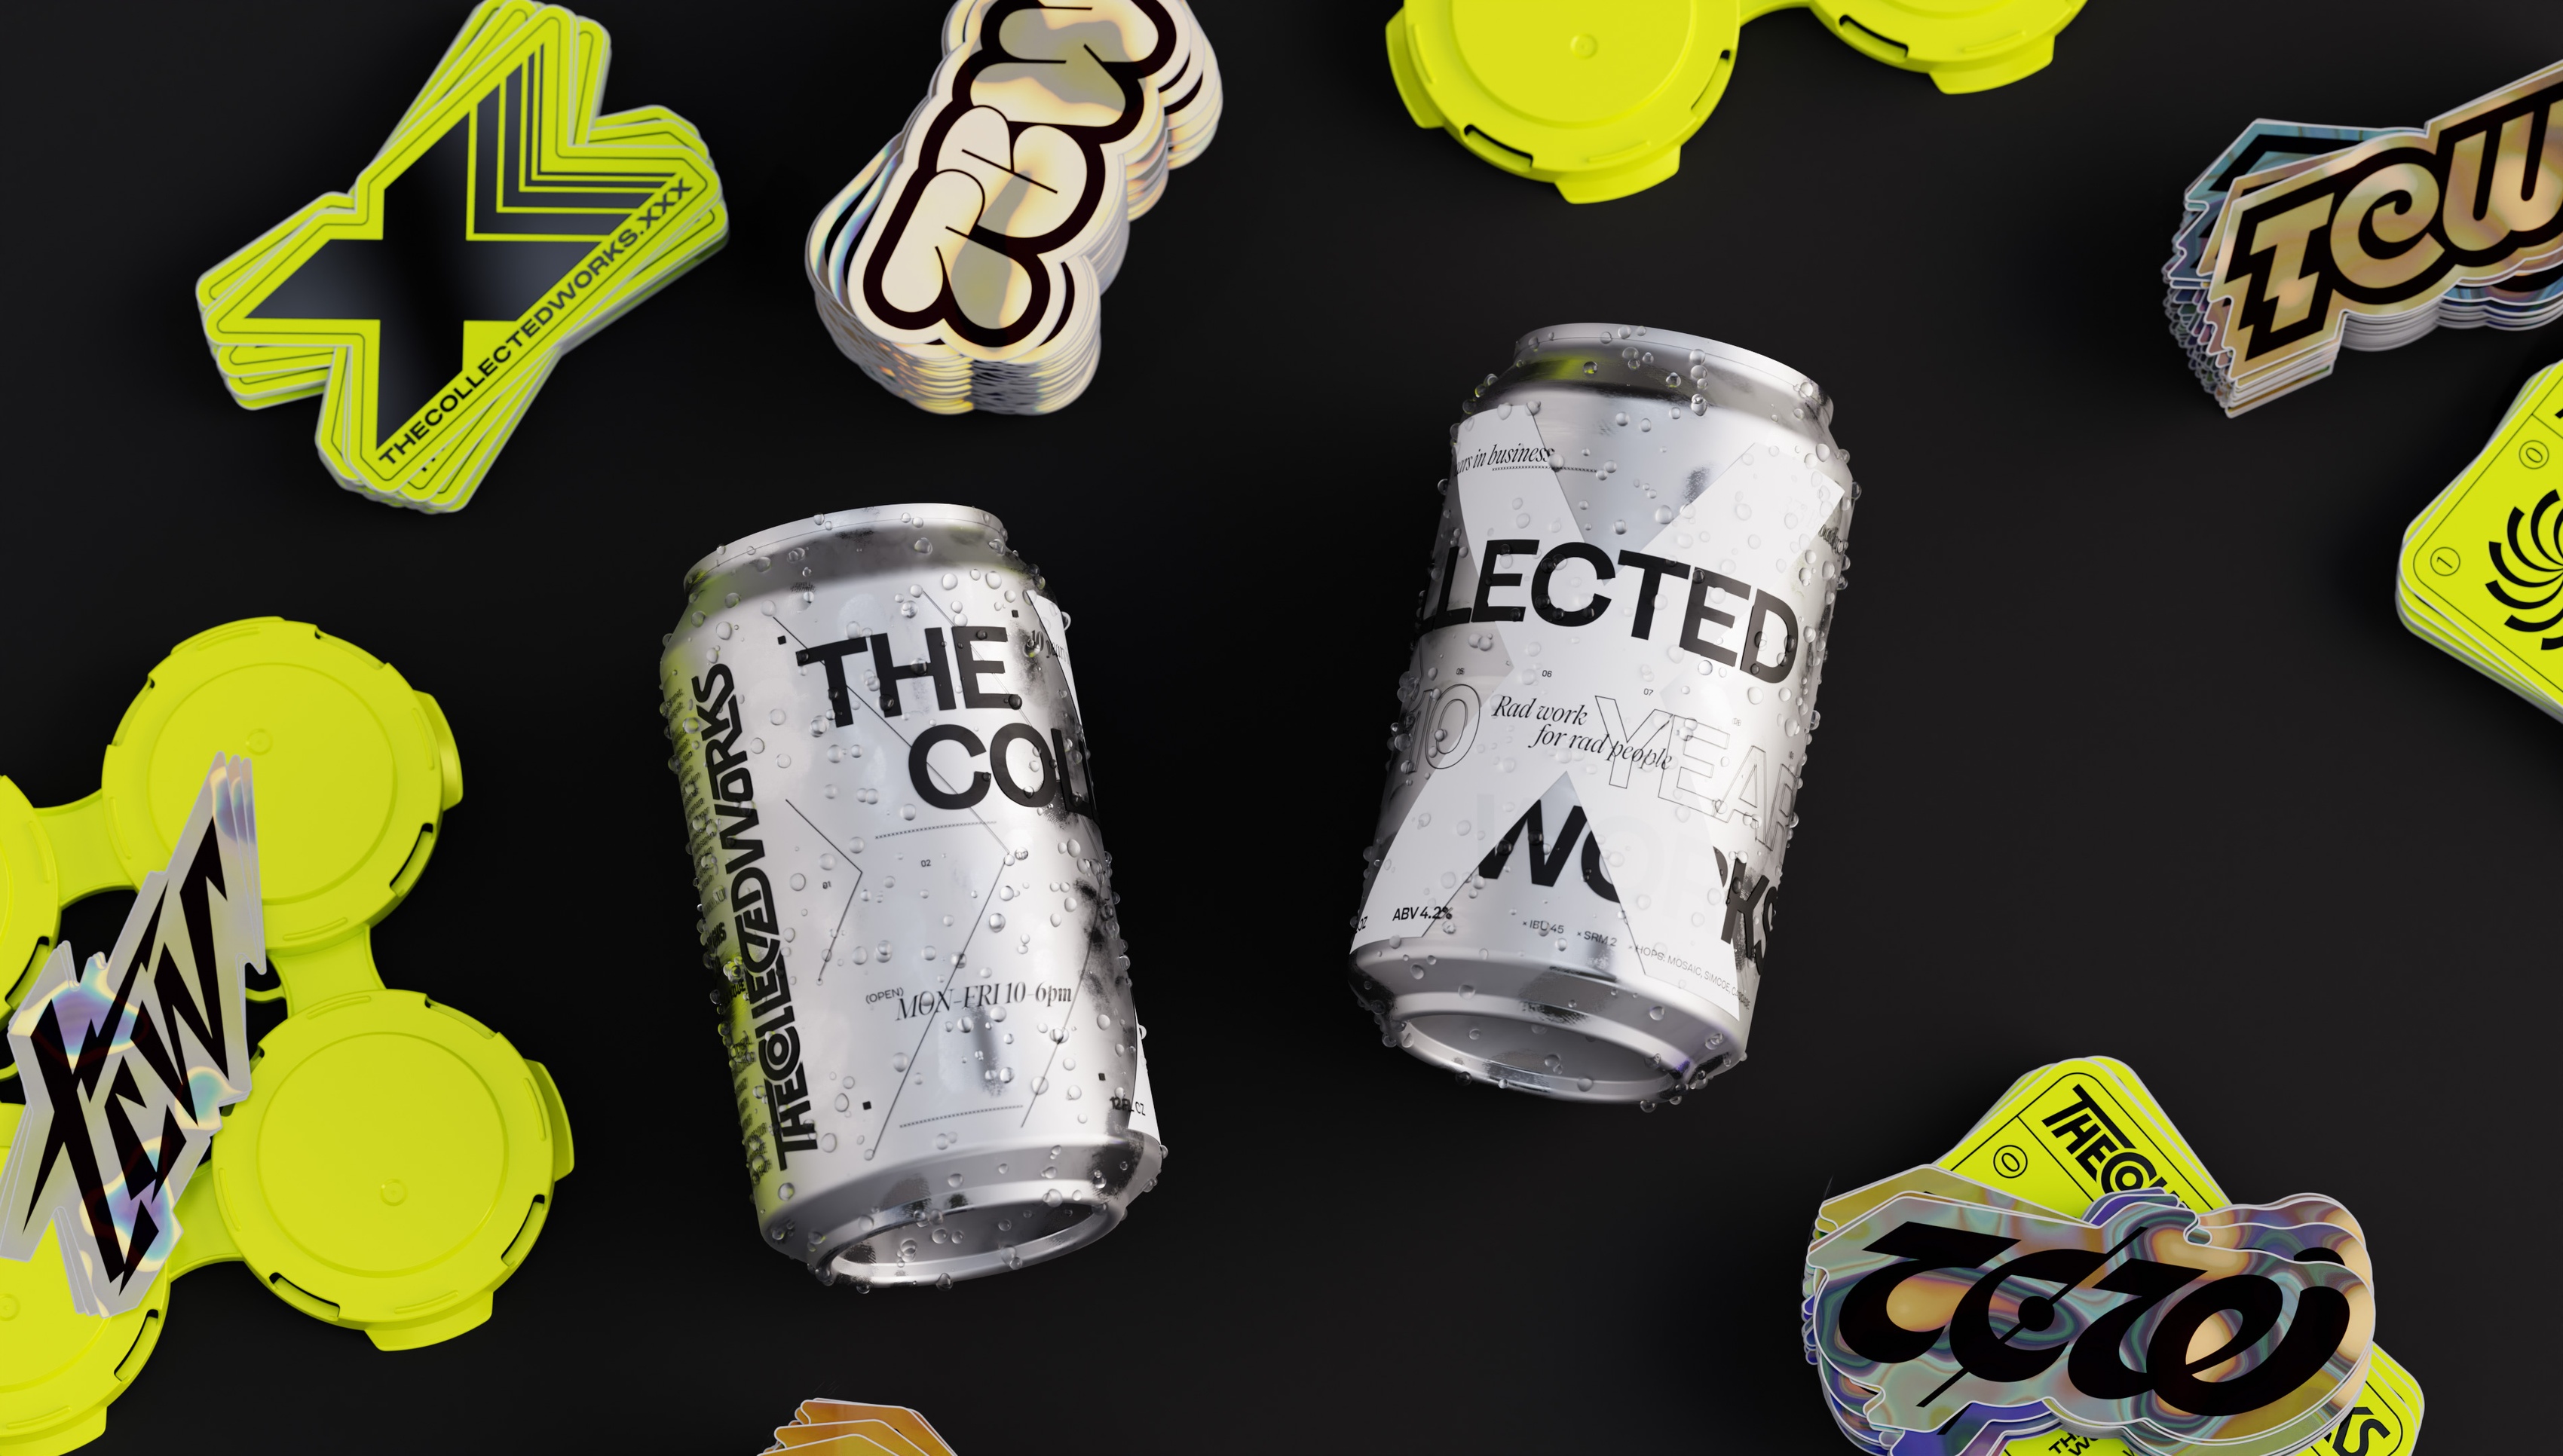 The Collected Works 10 Year Party beer cans, stickers, and hi-vis pakteks.